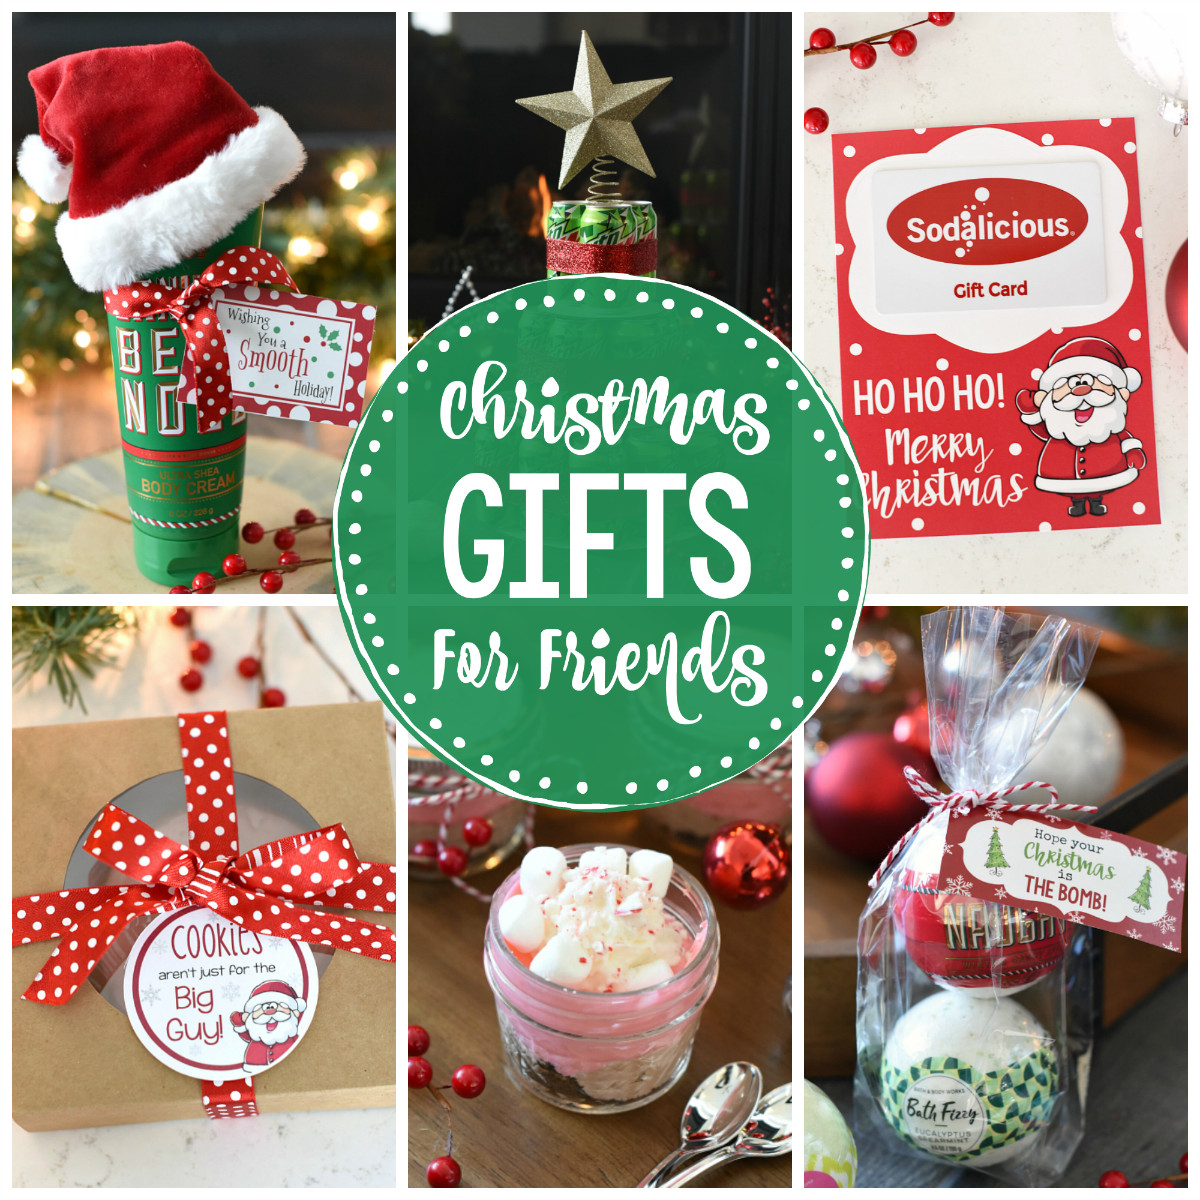 Good Holiday Gift Ideas
 Good Gifts for Friends at Christmas – Fun Squared